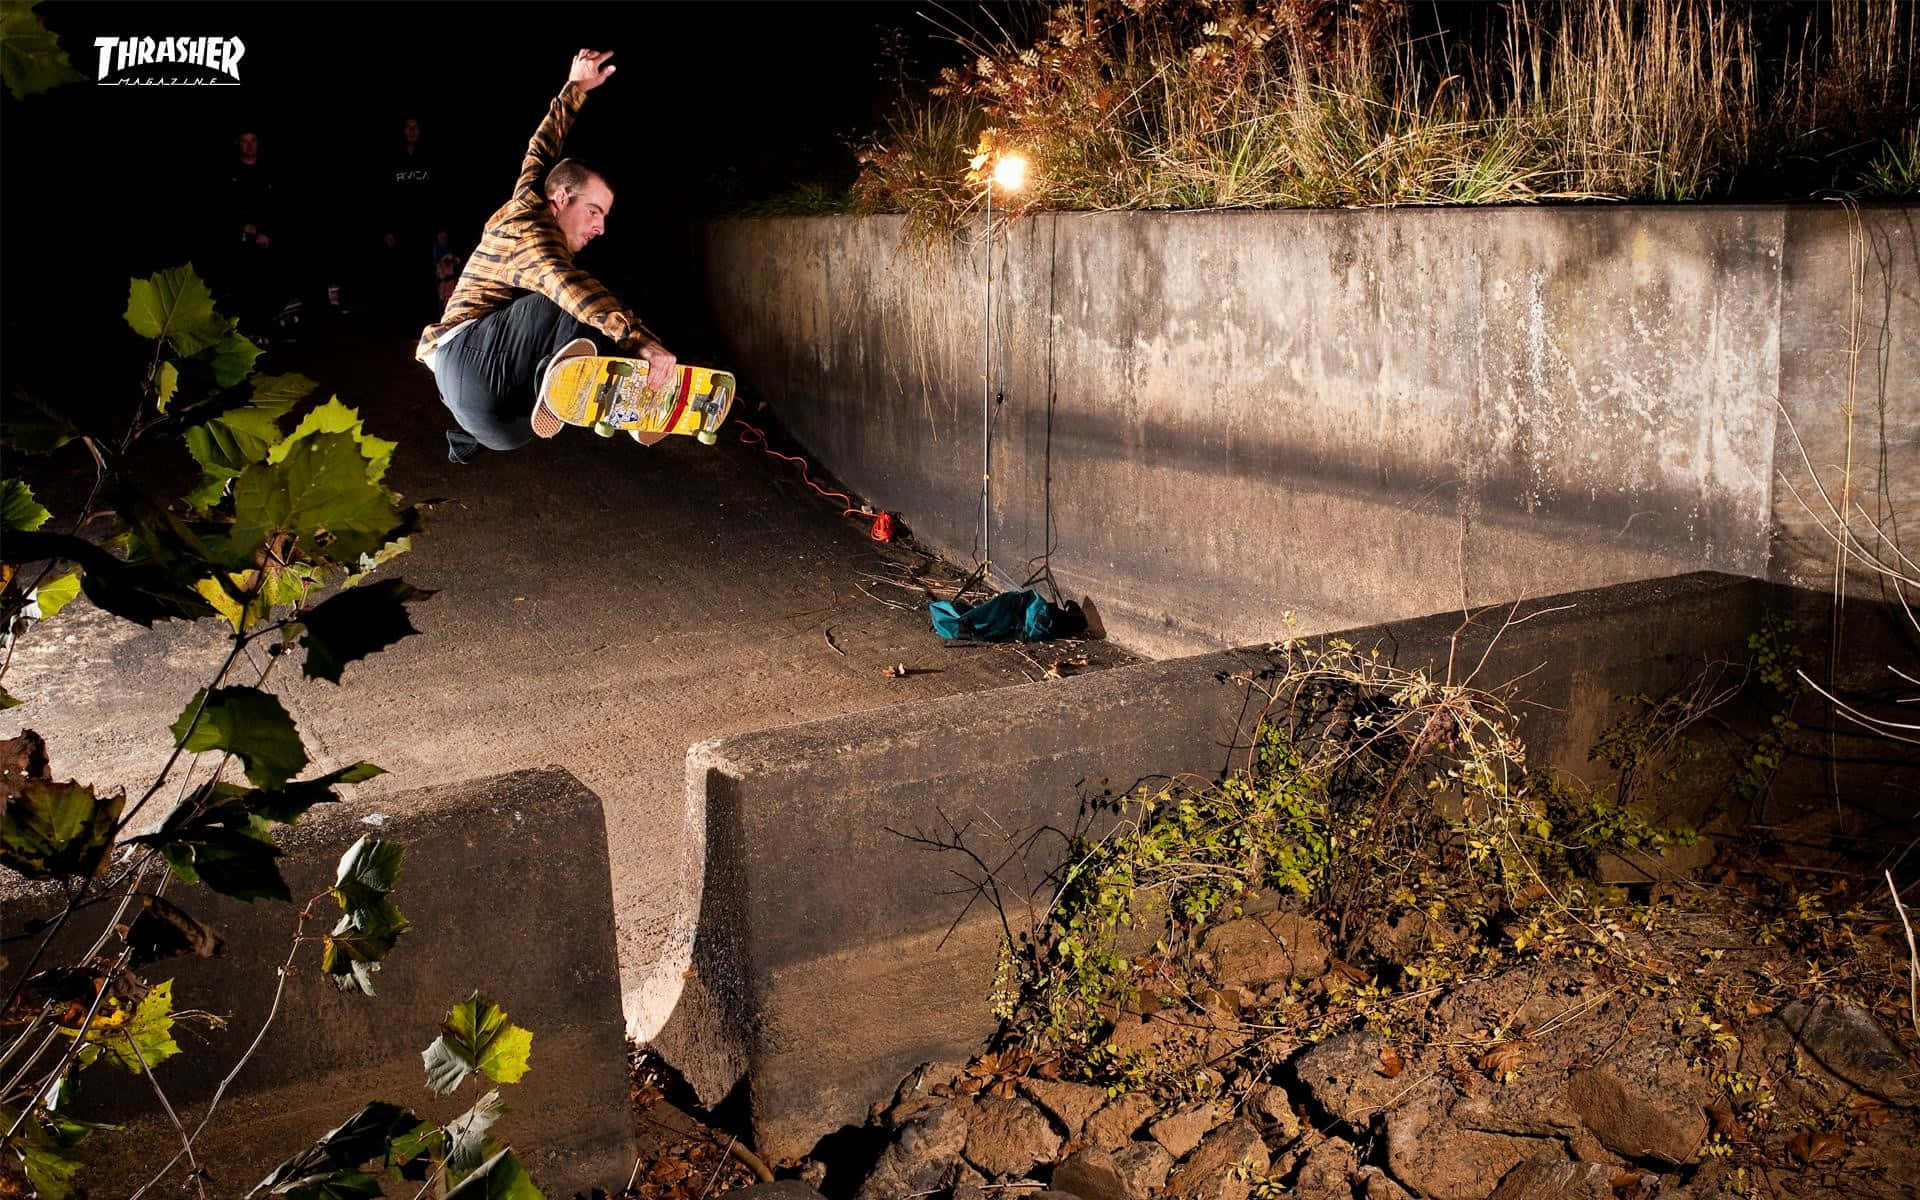 A Skateboarder Is Doing Tricks On A Concrete Wall